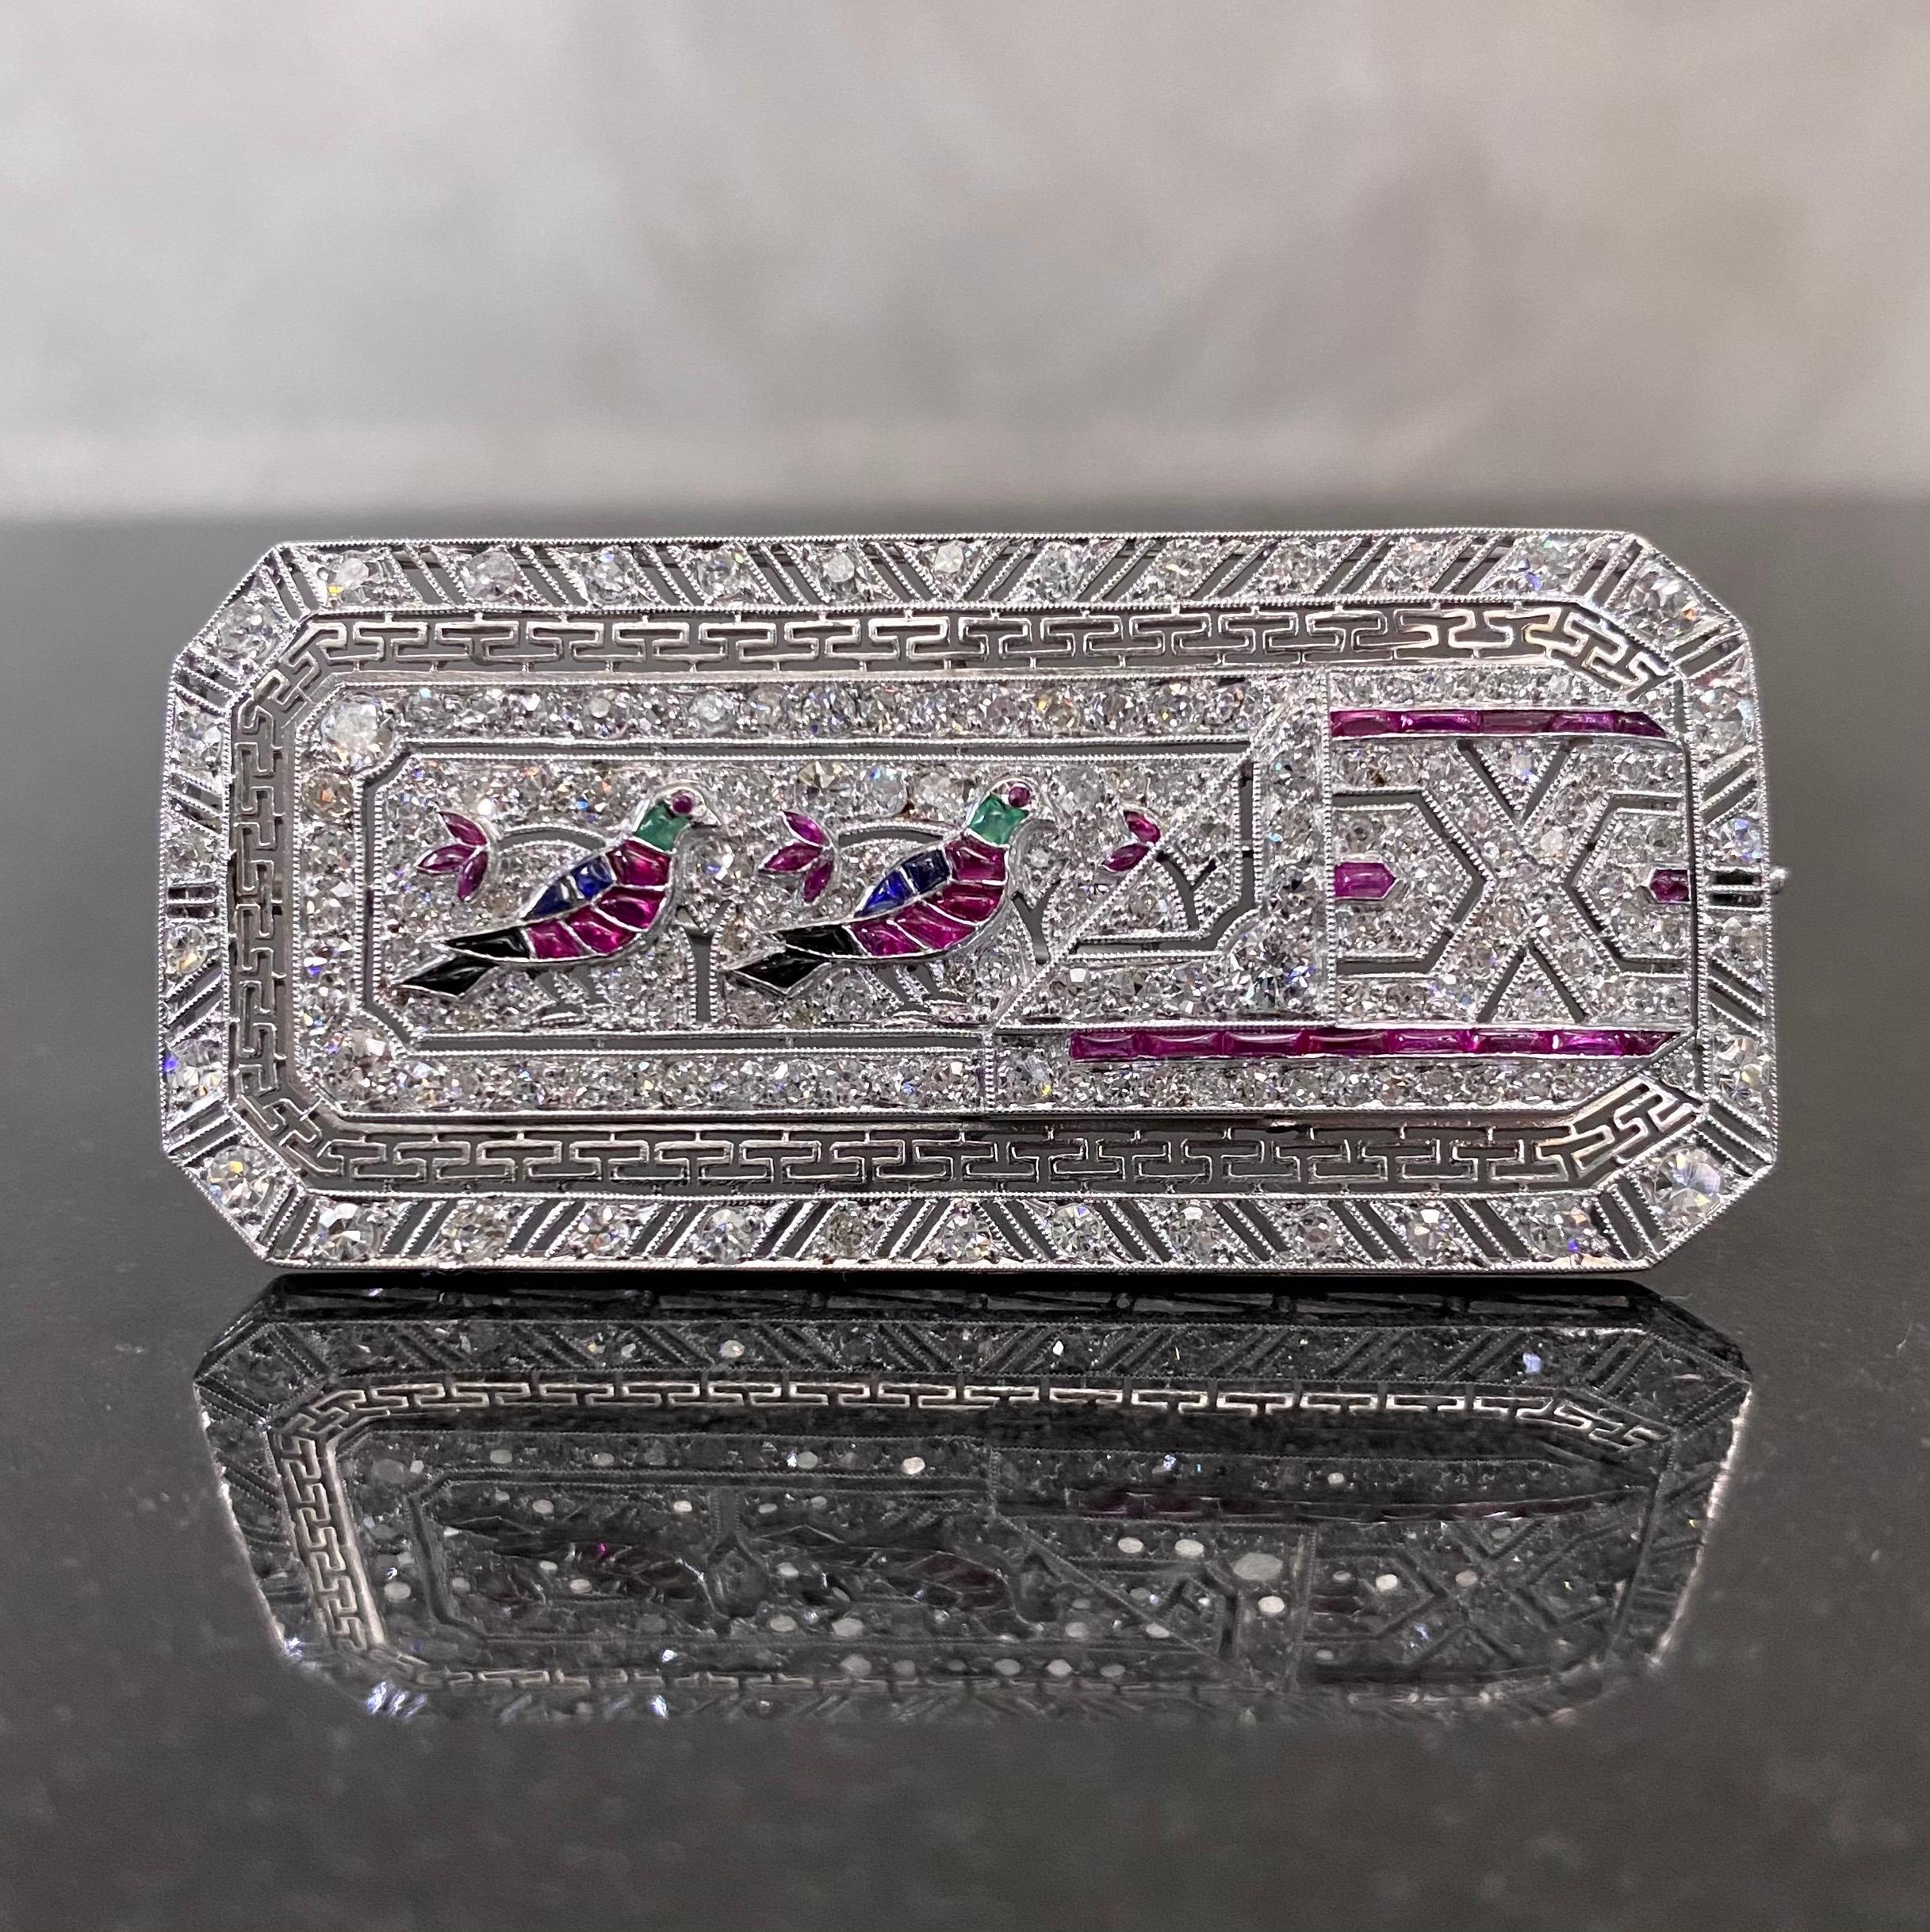 Egyptian Revival diamond and gem-set brooch in platinum. This geometric plaque brooch of an octagonal design is modelled as two hieroglyphic swallow birds decorated with calibre-cut rubies, sapphires, emeralds and onyx, further accented with ruby